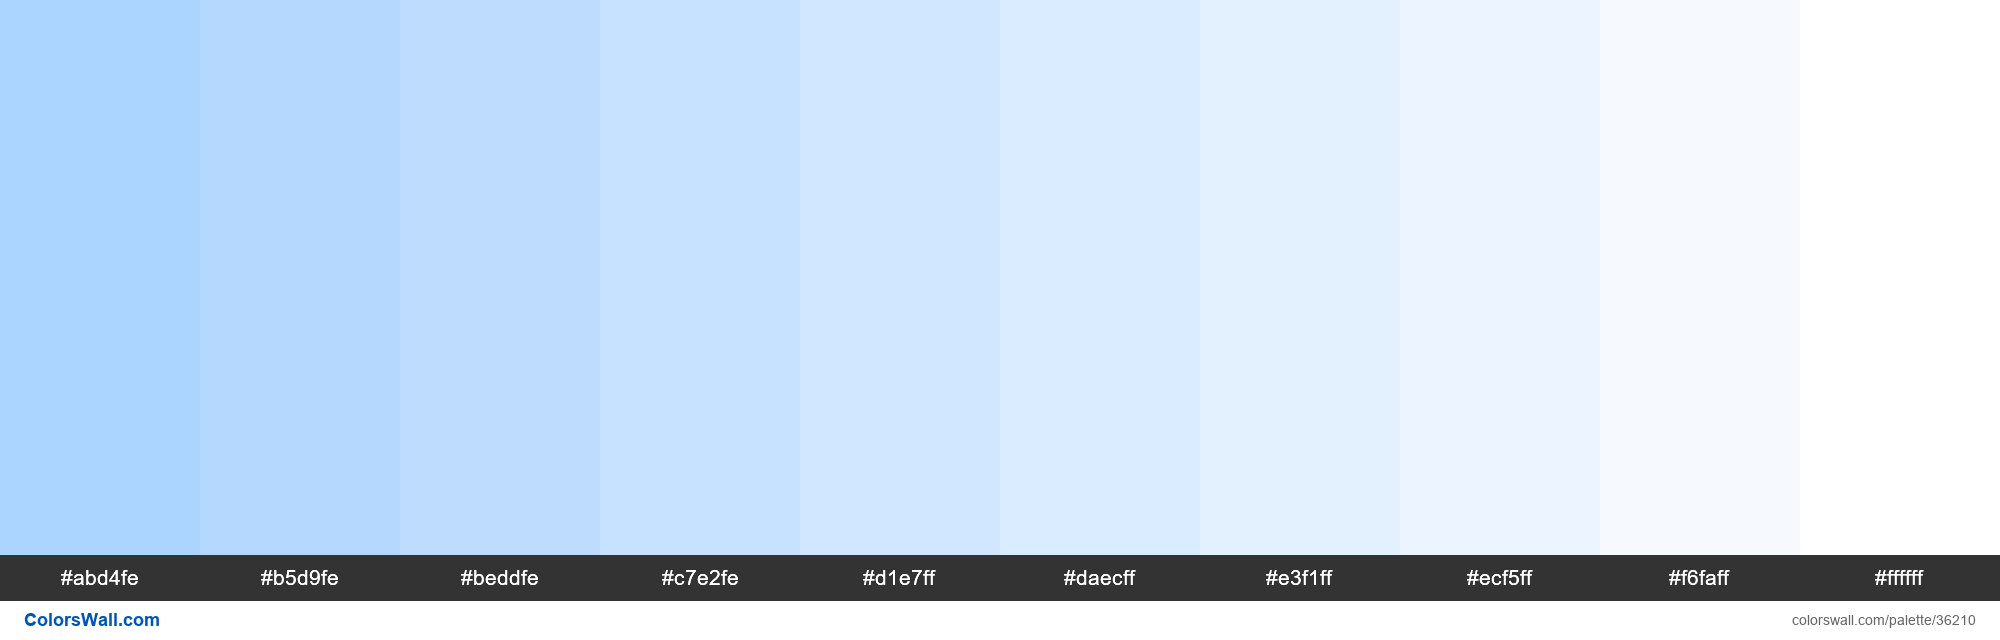 Tints Xkcd Color Baby Blue cffe Hex Hex Rgb Codes